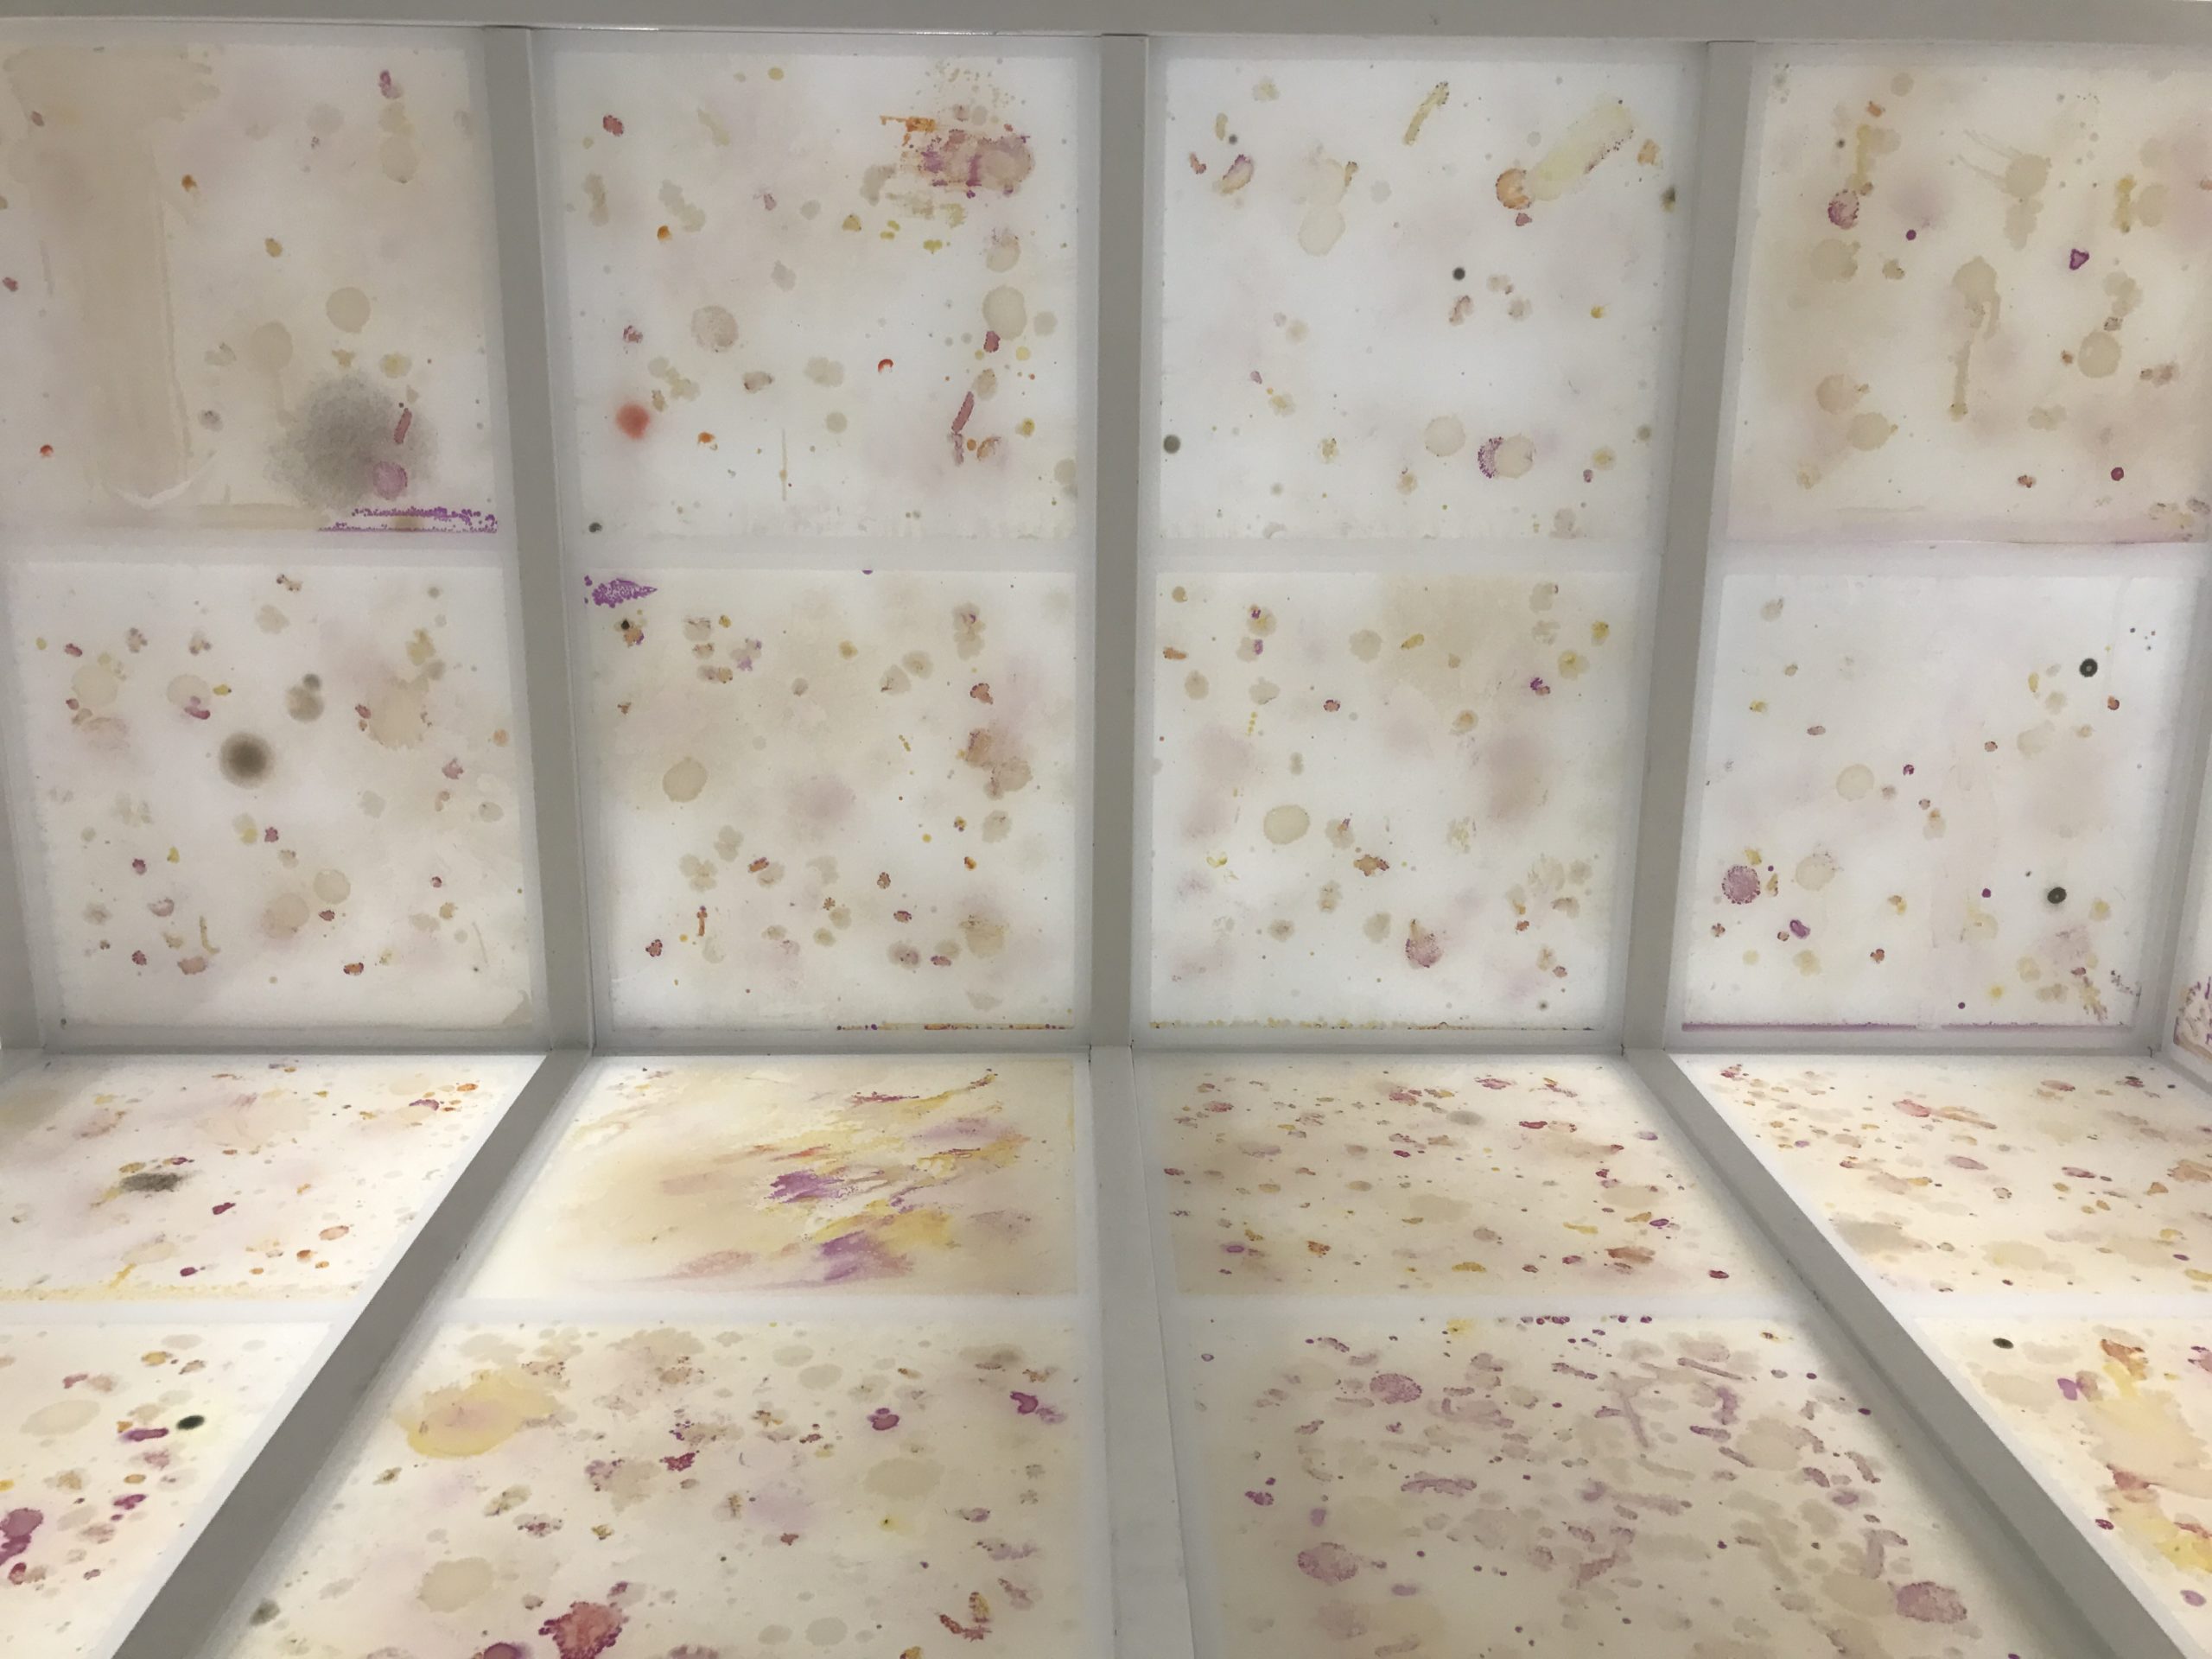 This Art Exhibition Is Made From Bacteria, Live Insects And Human Sweat